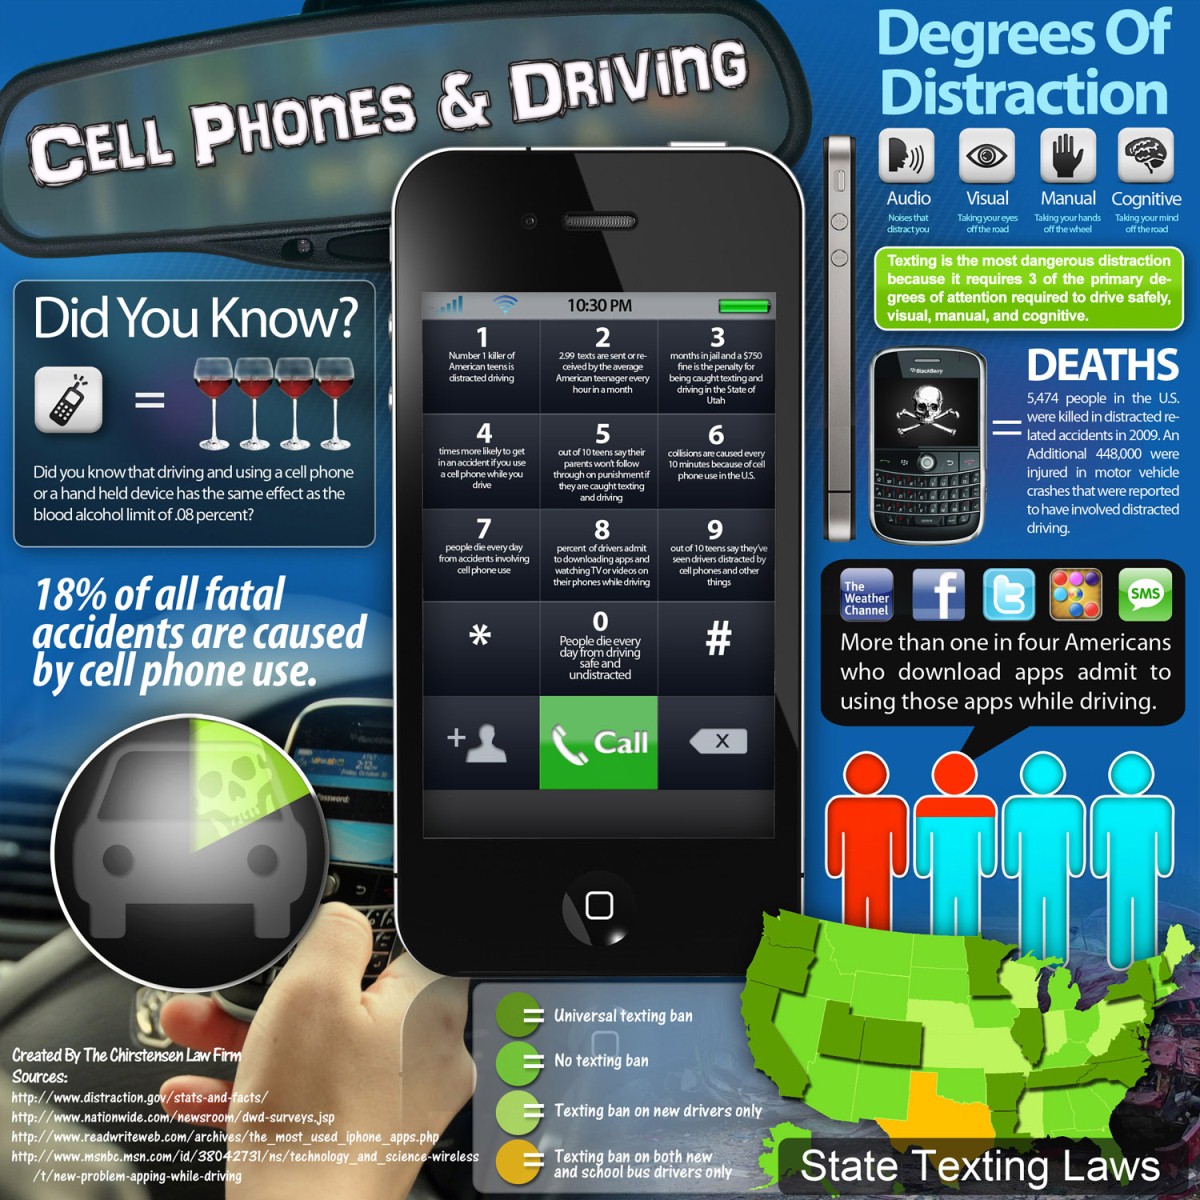 Cell phones distract from driving